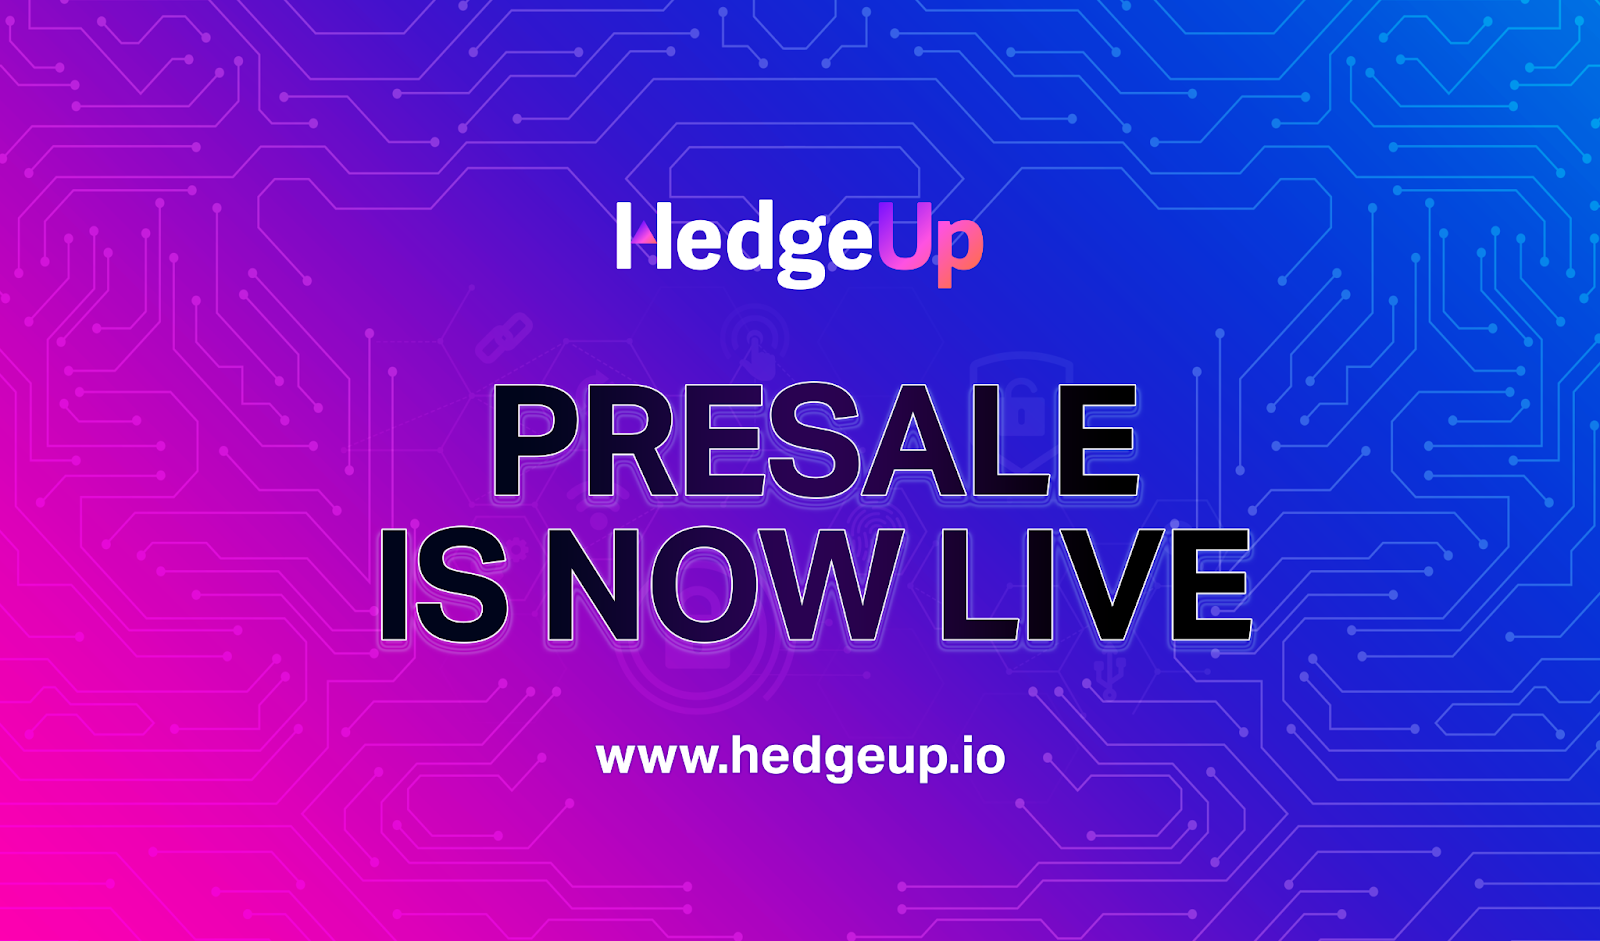 HedgeUP (HDUP) Outshines Decentraland (MANA) and MultiversX (EGLD) with Tokenized Real-World Assets